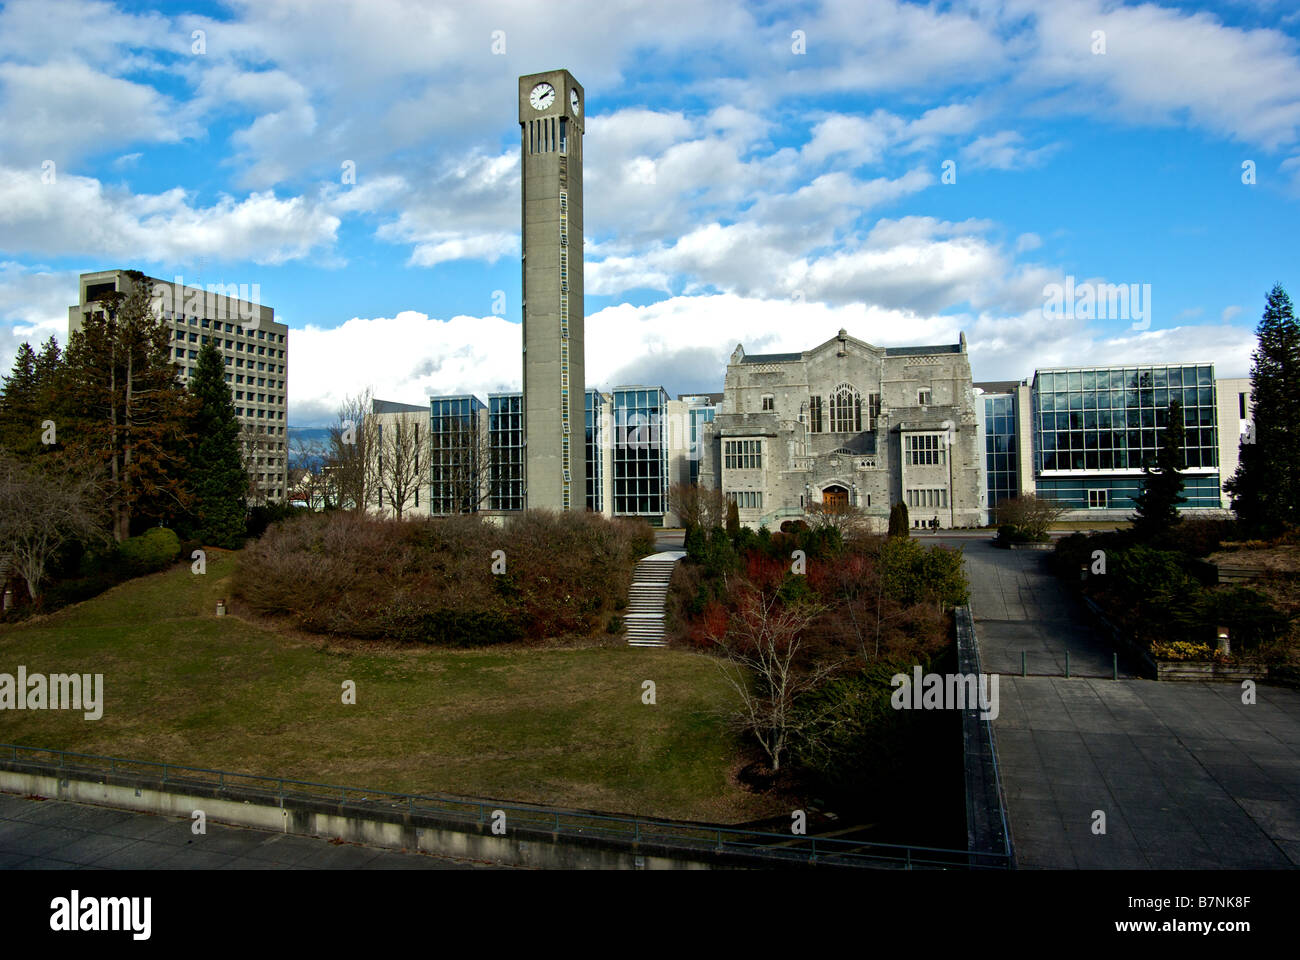 Ladner clock tower in front of main library building on UBC Campus Stock Photo